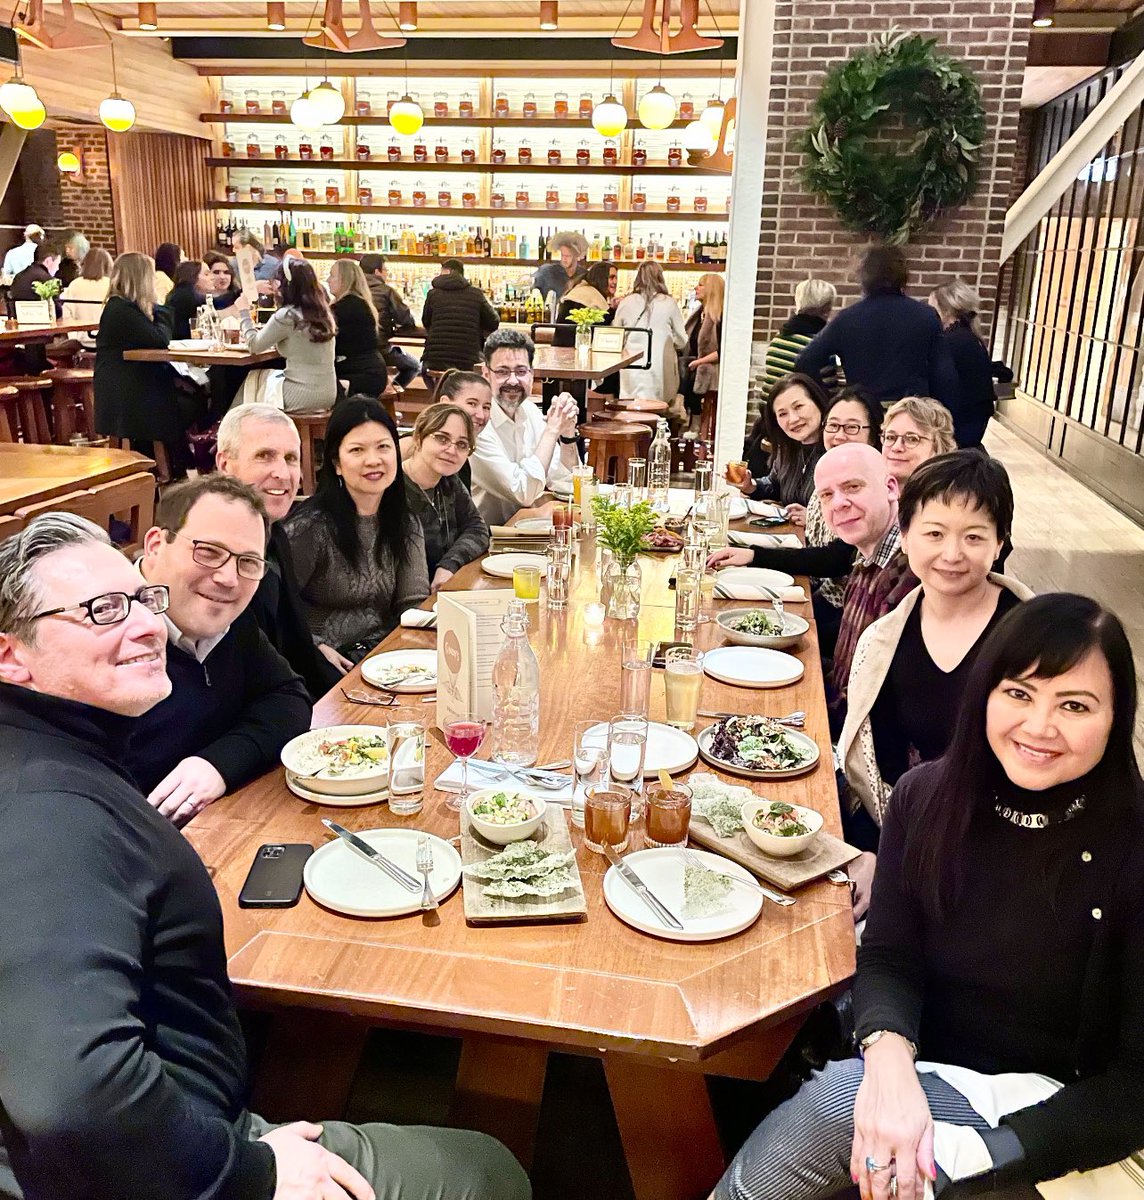 Another great meeting of the @radiology_rsna editorial team (current and former)! Great catching up at #RSNA2023 @VChernyakMD @ProfVickyGoh @DrLindaMoy @DavidBluemke @DrCliffWeiss @yoshimianzai @NeuroDx